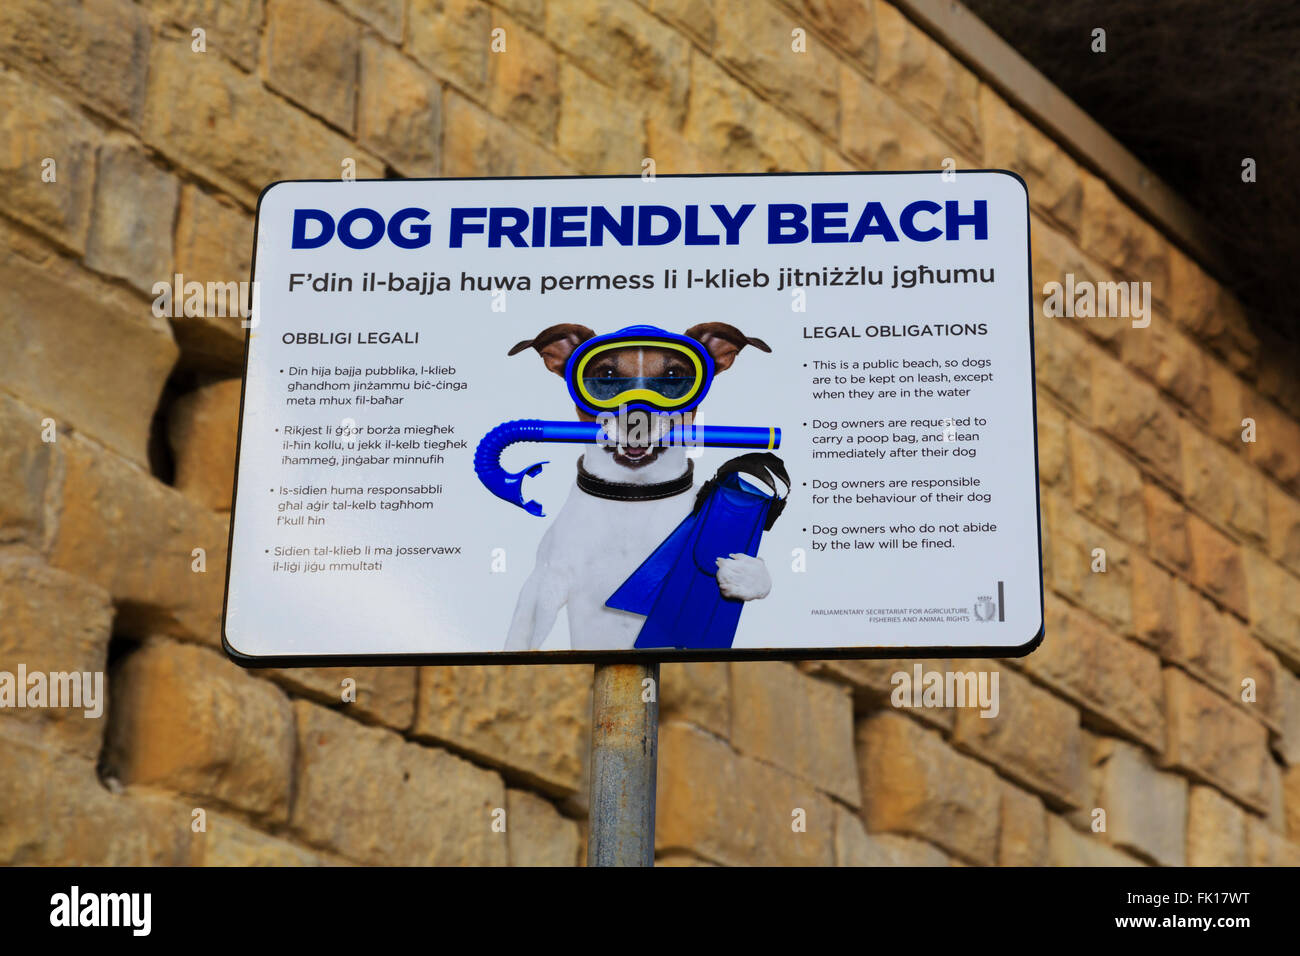 'Dog friendly beach' sign in English and Maltese, giving legal obligations to dog owners. Stock Photo